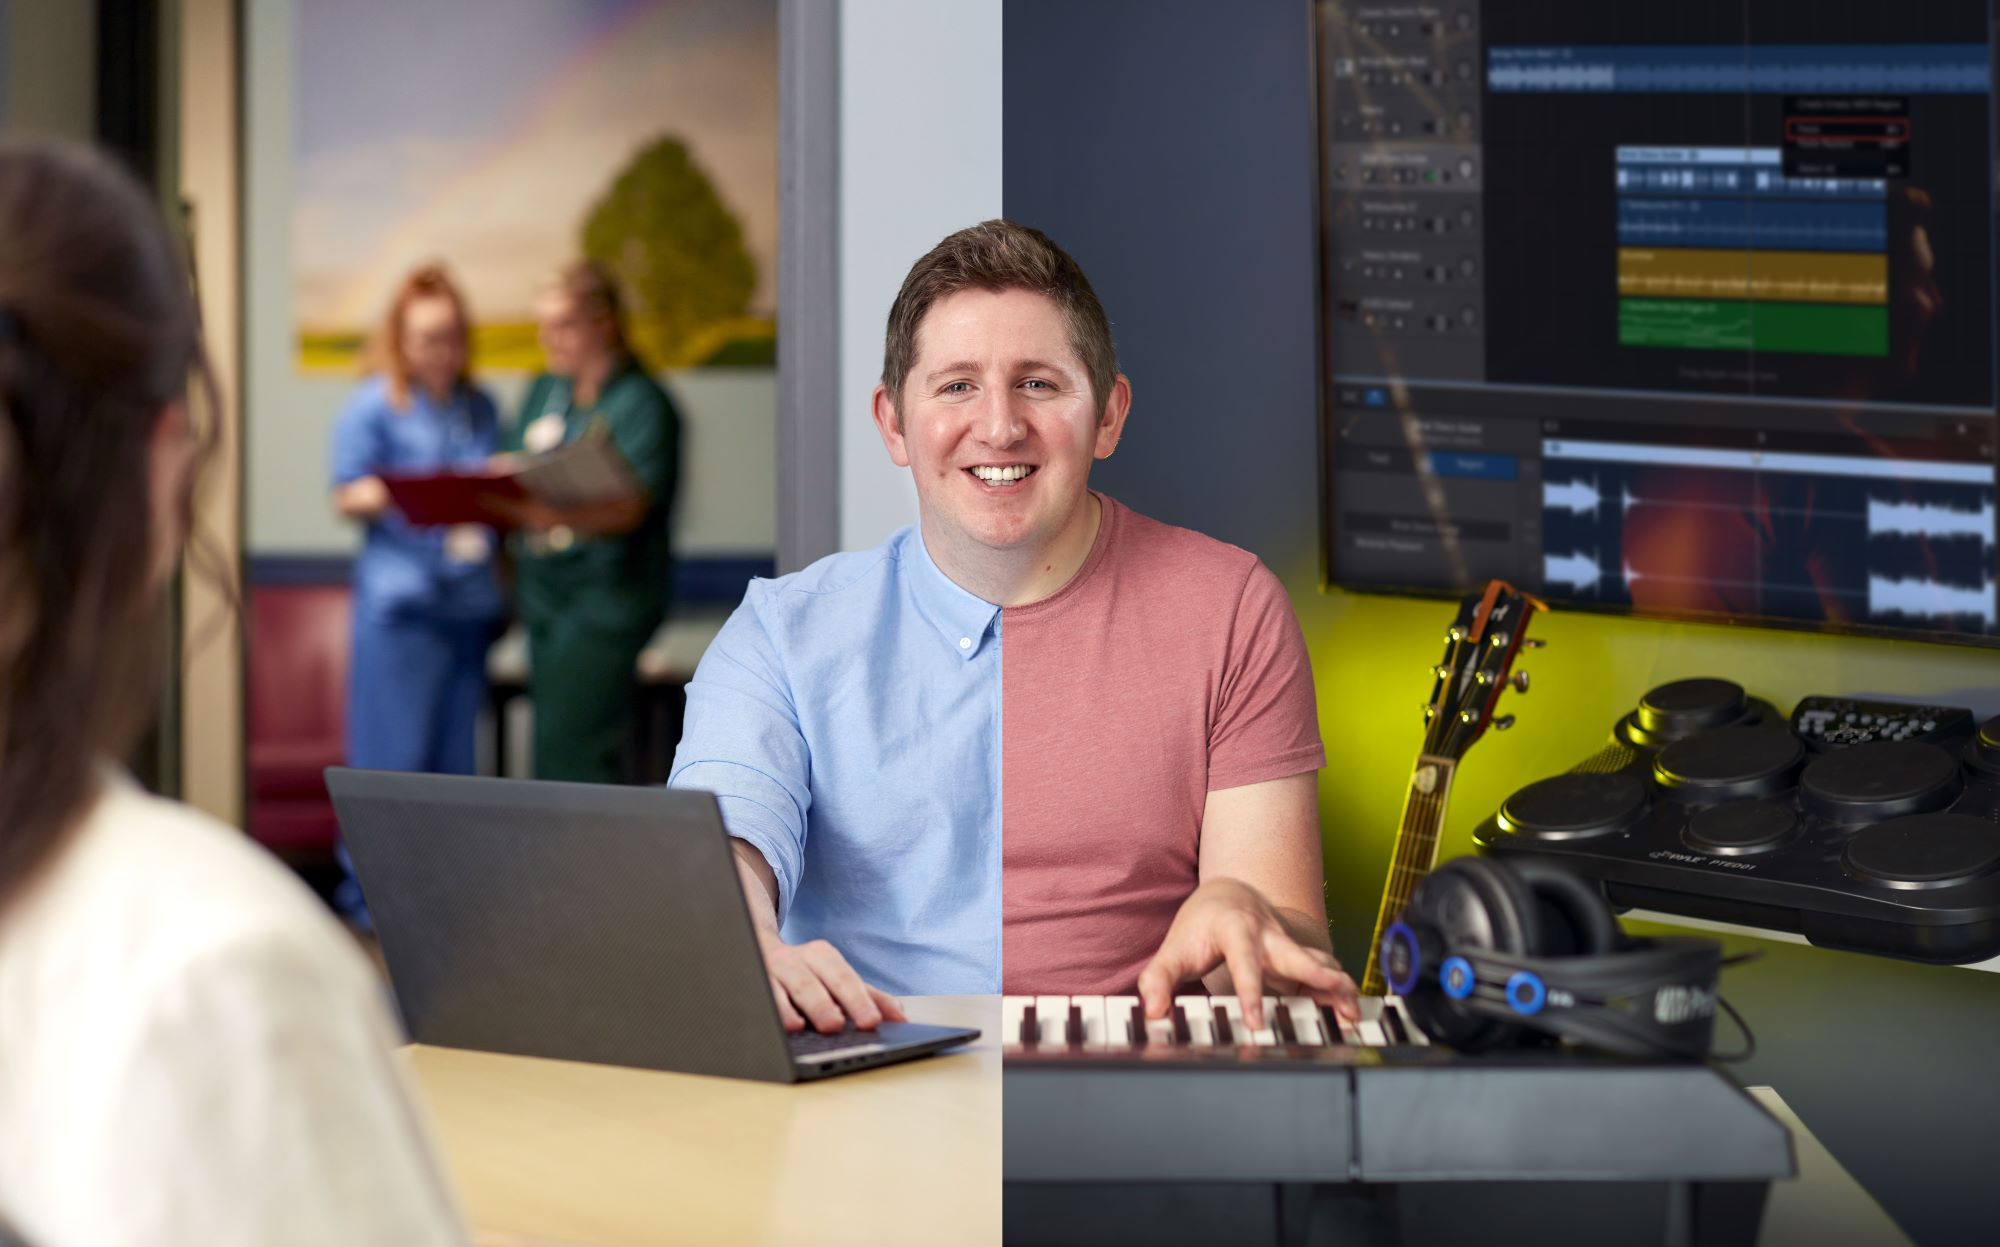 Split image showing James at work and in his leisure time